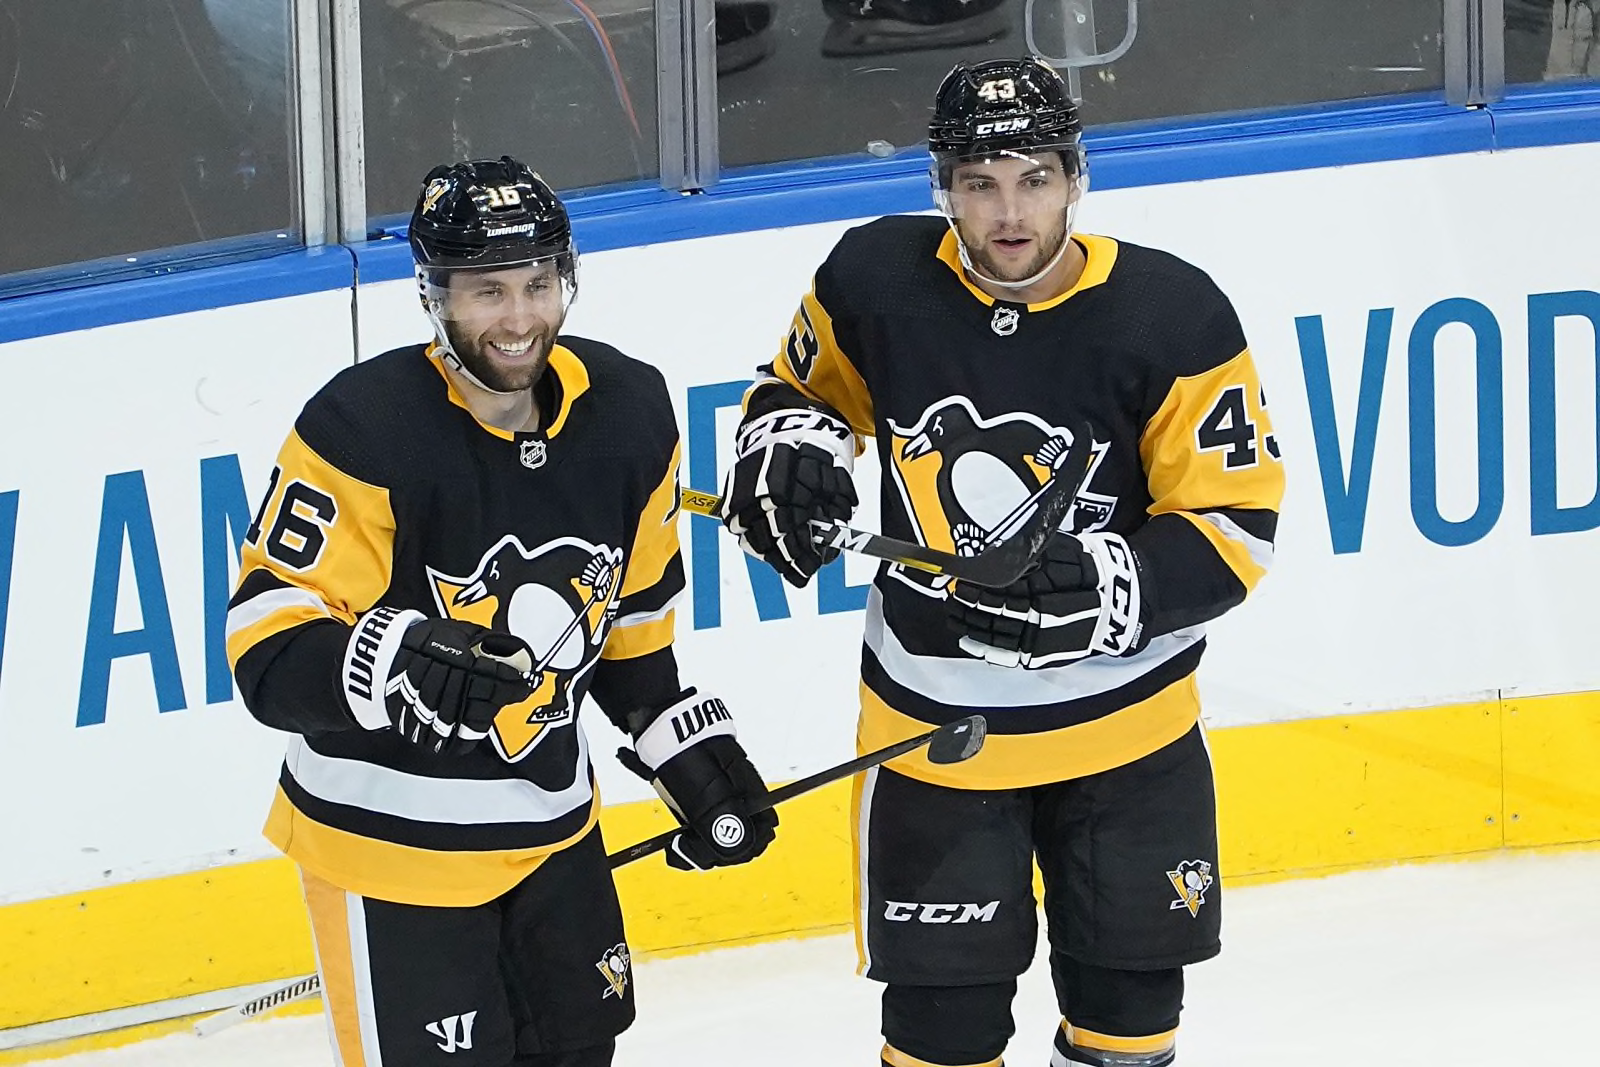 penguins new jersey 2017